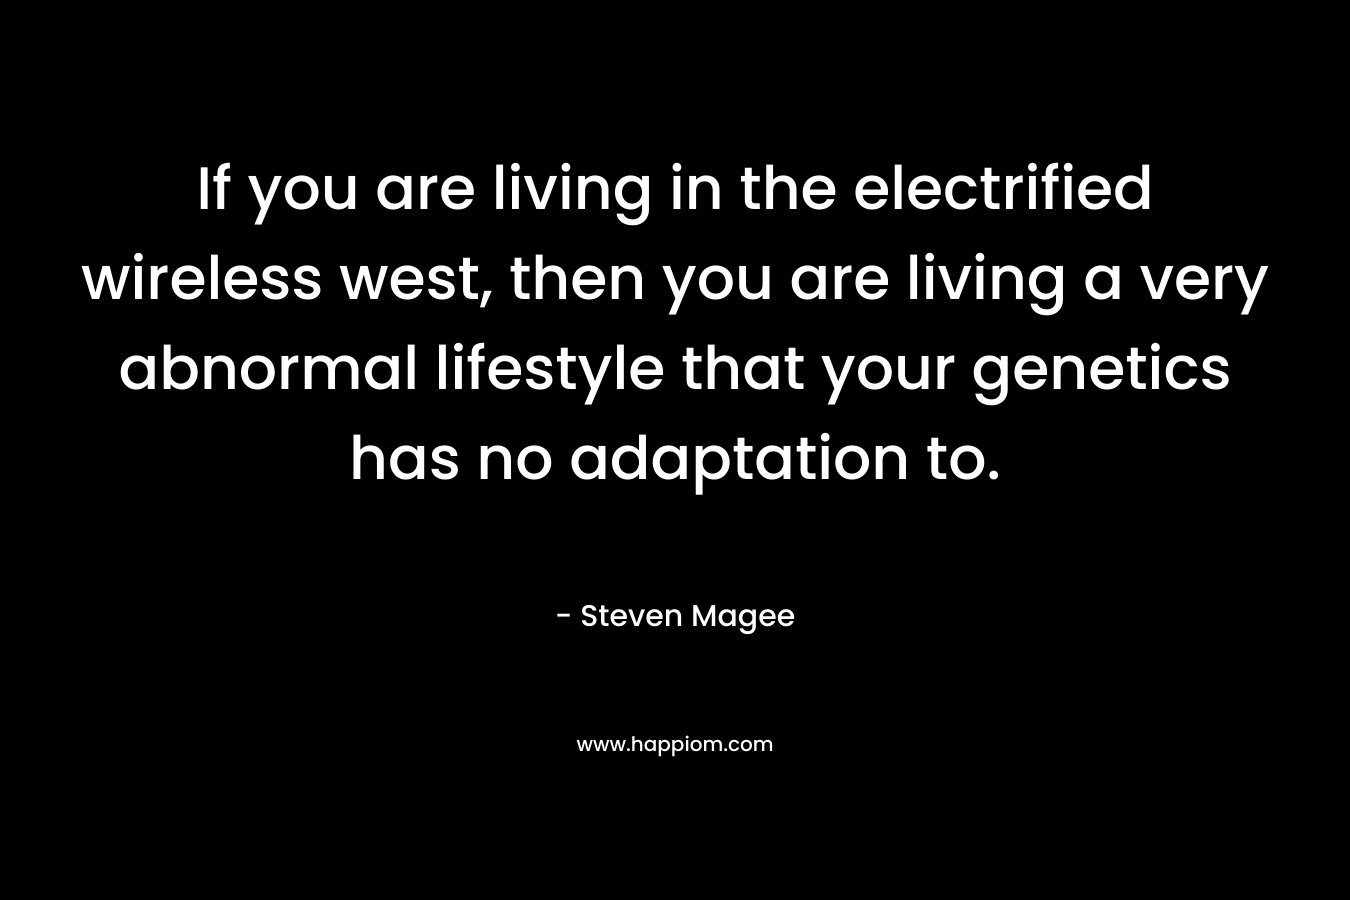 If you are living in the electrified wireless west, then you are living a very abnormal lifestyle that your genetics has no adaptation to. – Steven Magee